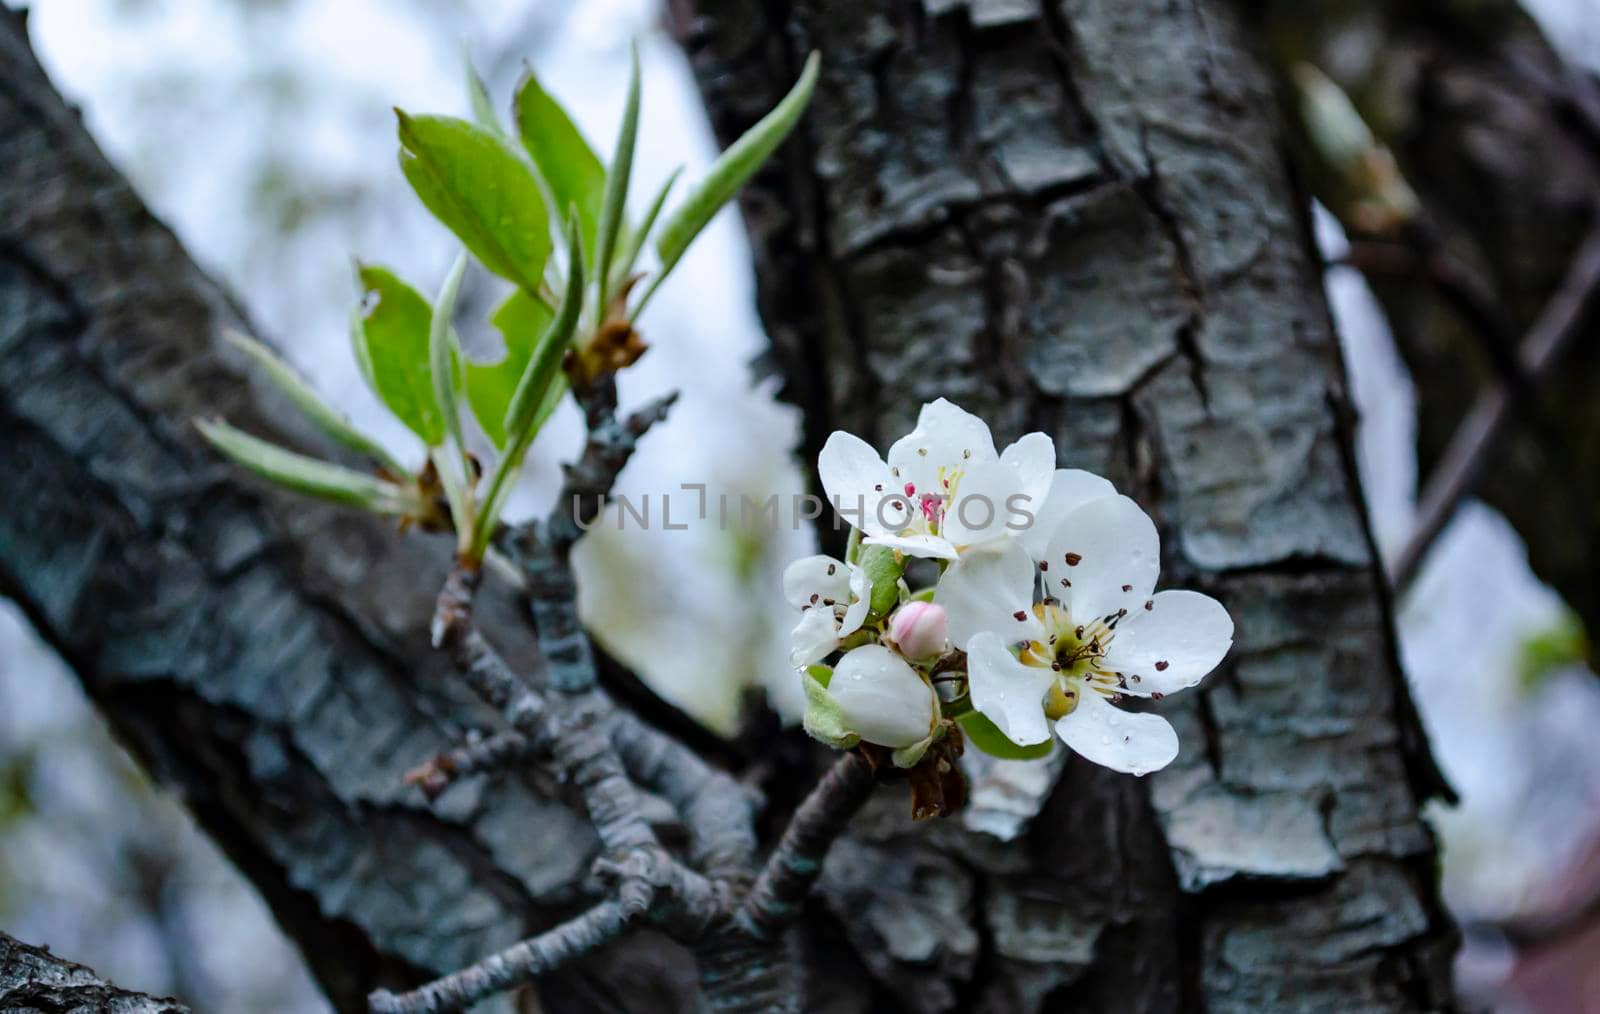 Flowering apple tree with raindrops .Fresh spring background on nature outdoors.Soft focus image of blooming flowers in springtime. Spring agro concept